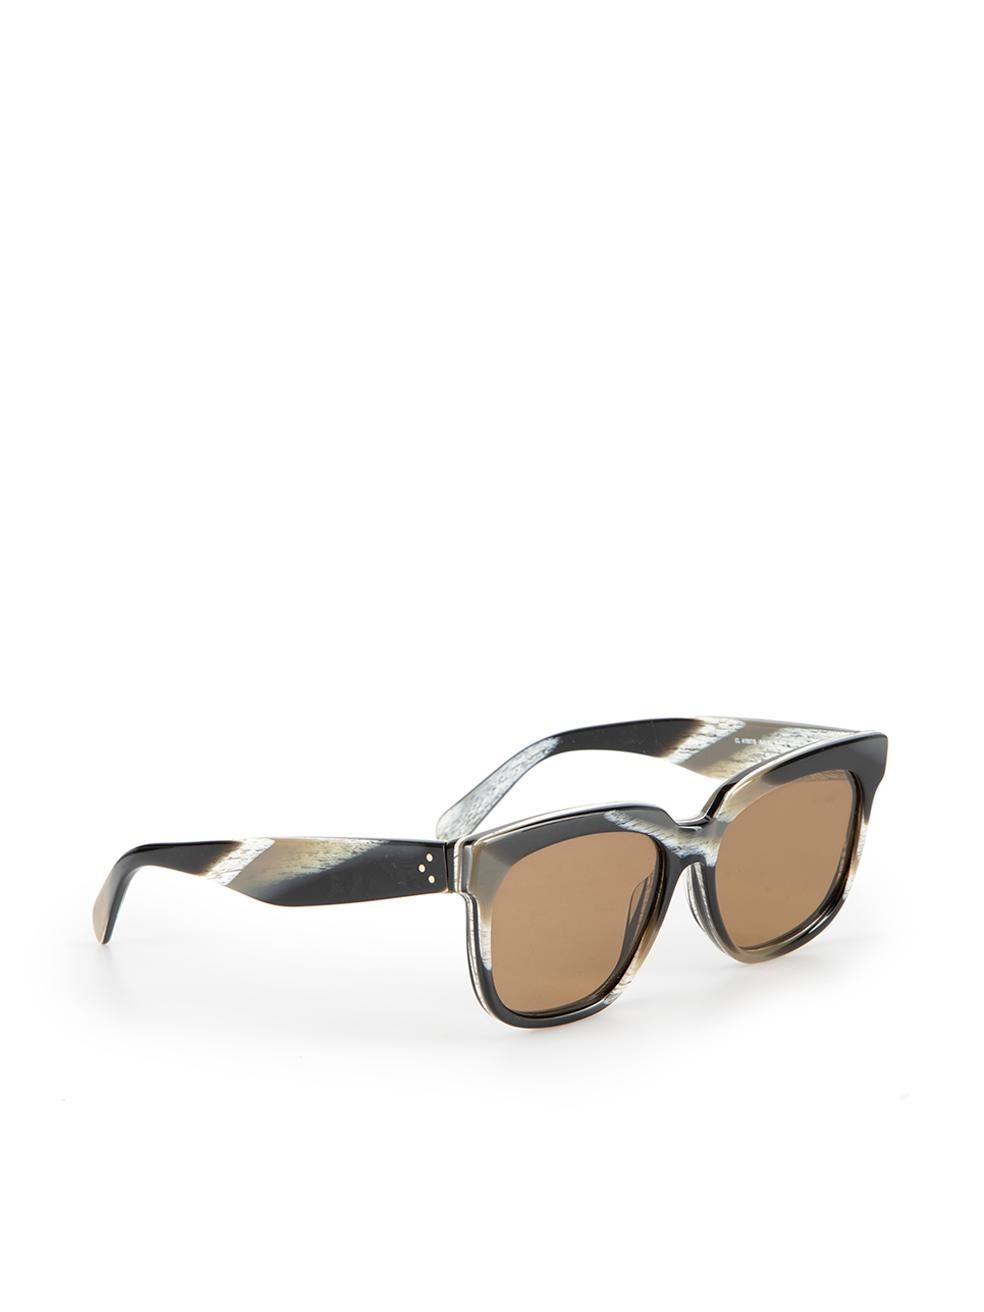 CONDITION is Very good. Hardly any visible wear to sunglasses is evident on this used Céline designer resale item. These sunglasses come with original case.



Details


Multicolour

Plastic

Sunglasses

Square frame

Abstract striped pattern

Brown